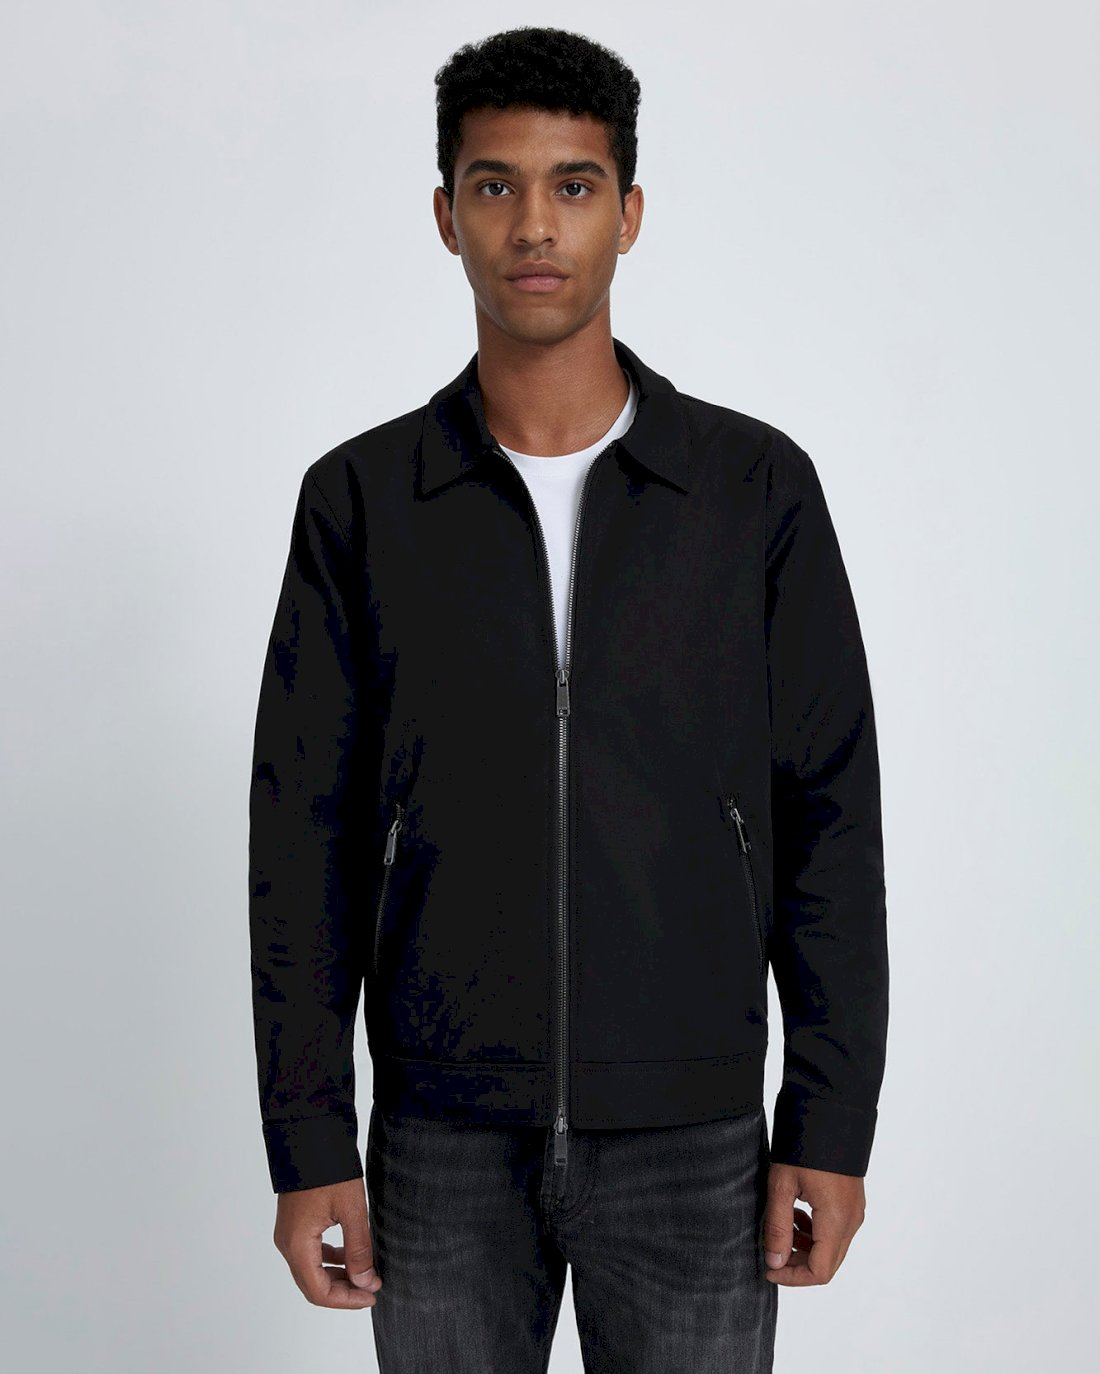 7 For All Mankind Barracuda Jacket in Black 7M928Q32BLK